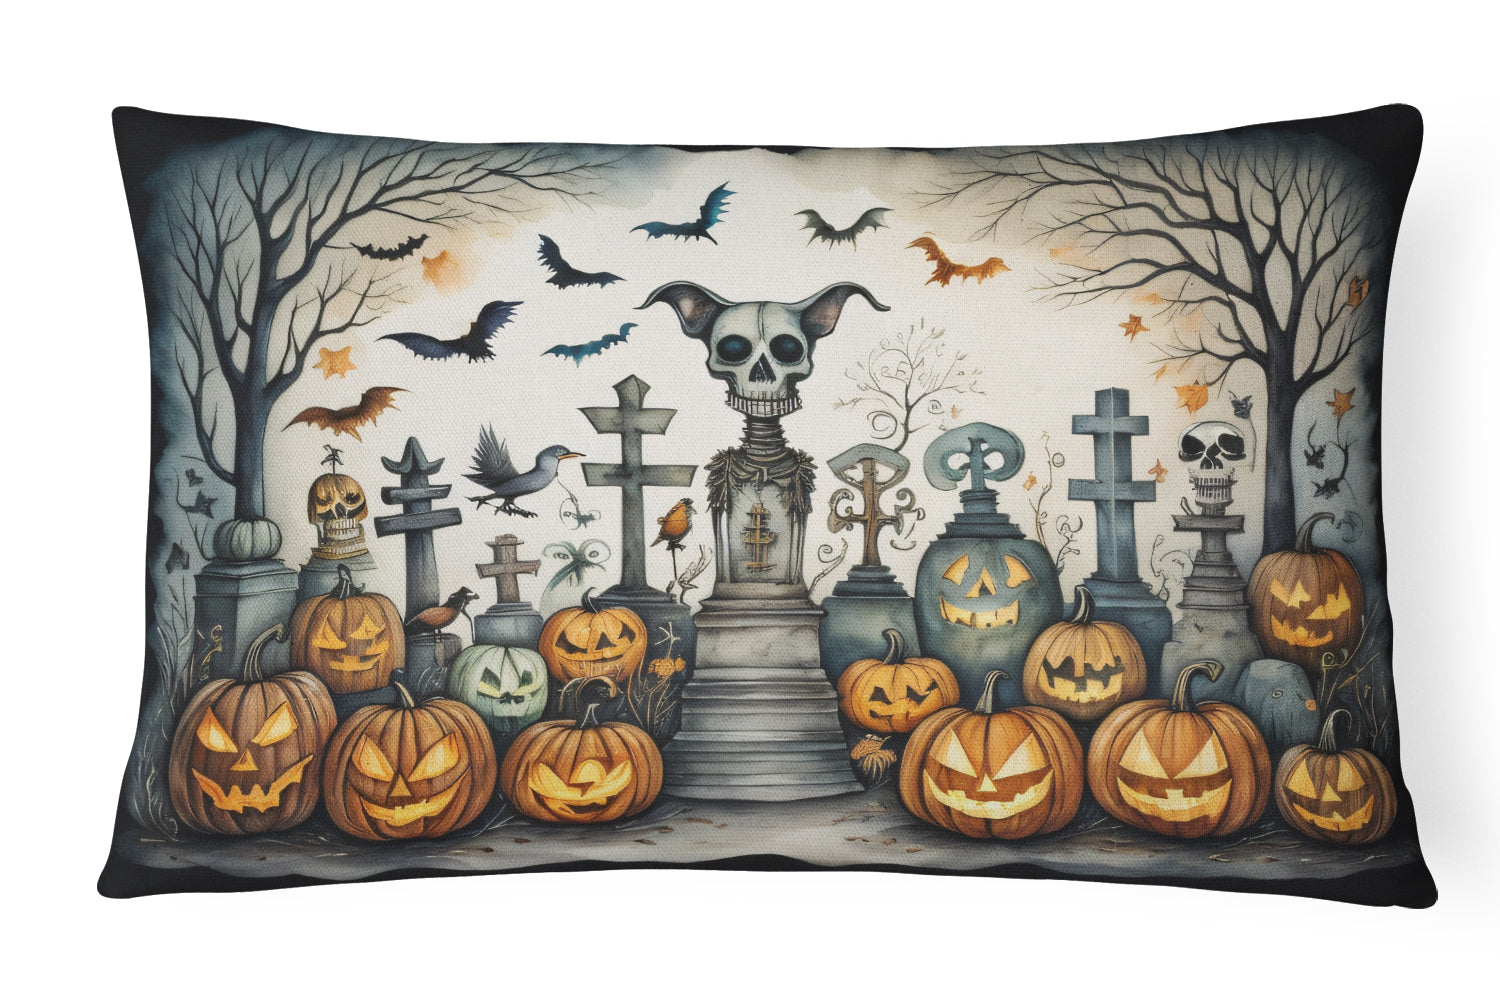 Buy this Pet Cemetery Spooky Halloween Fabric Decorative Pillow